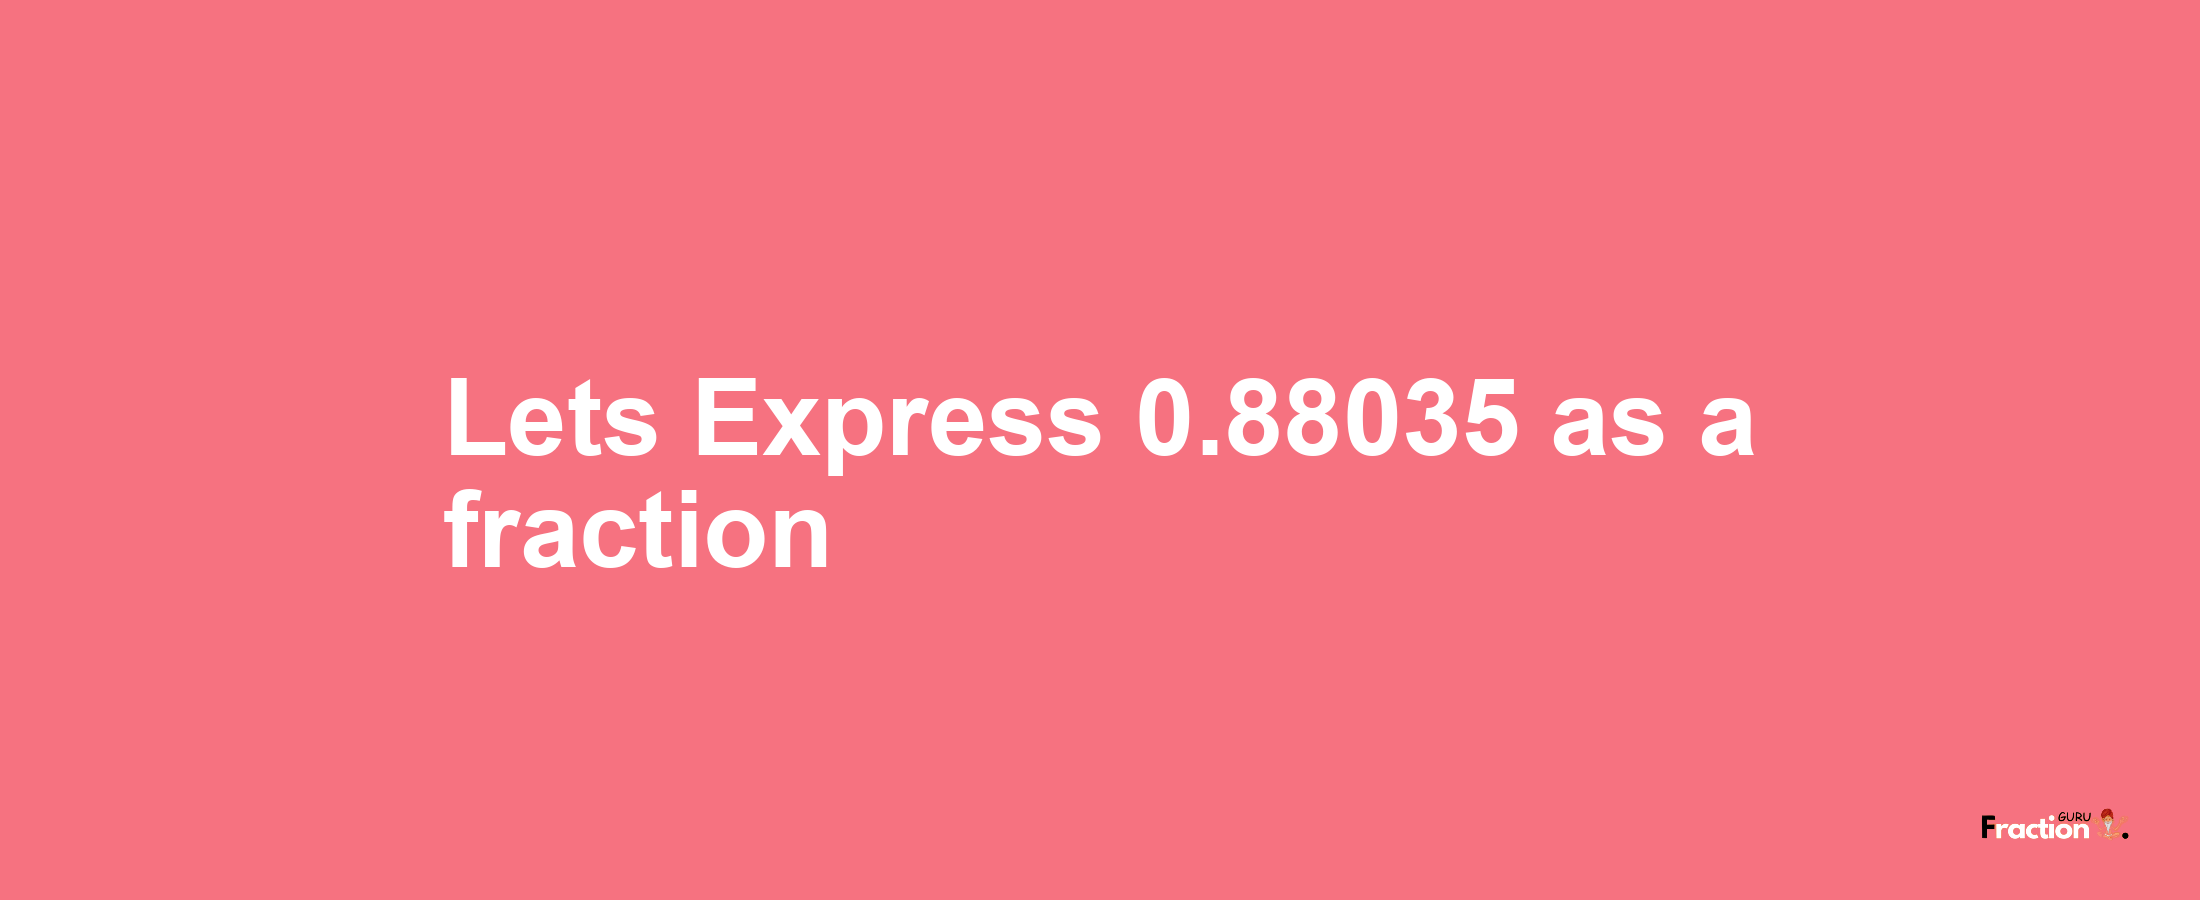 Lets Express 0.88035 as afraction